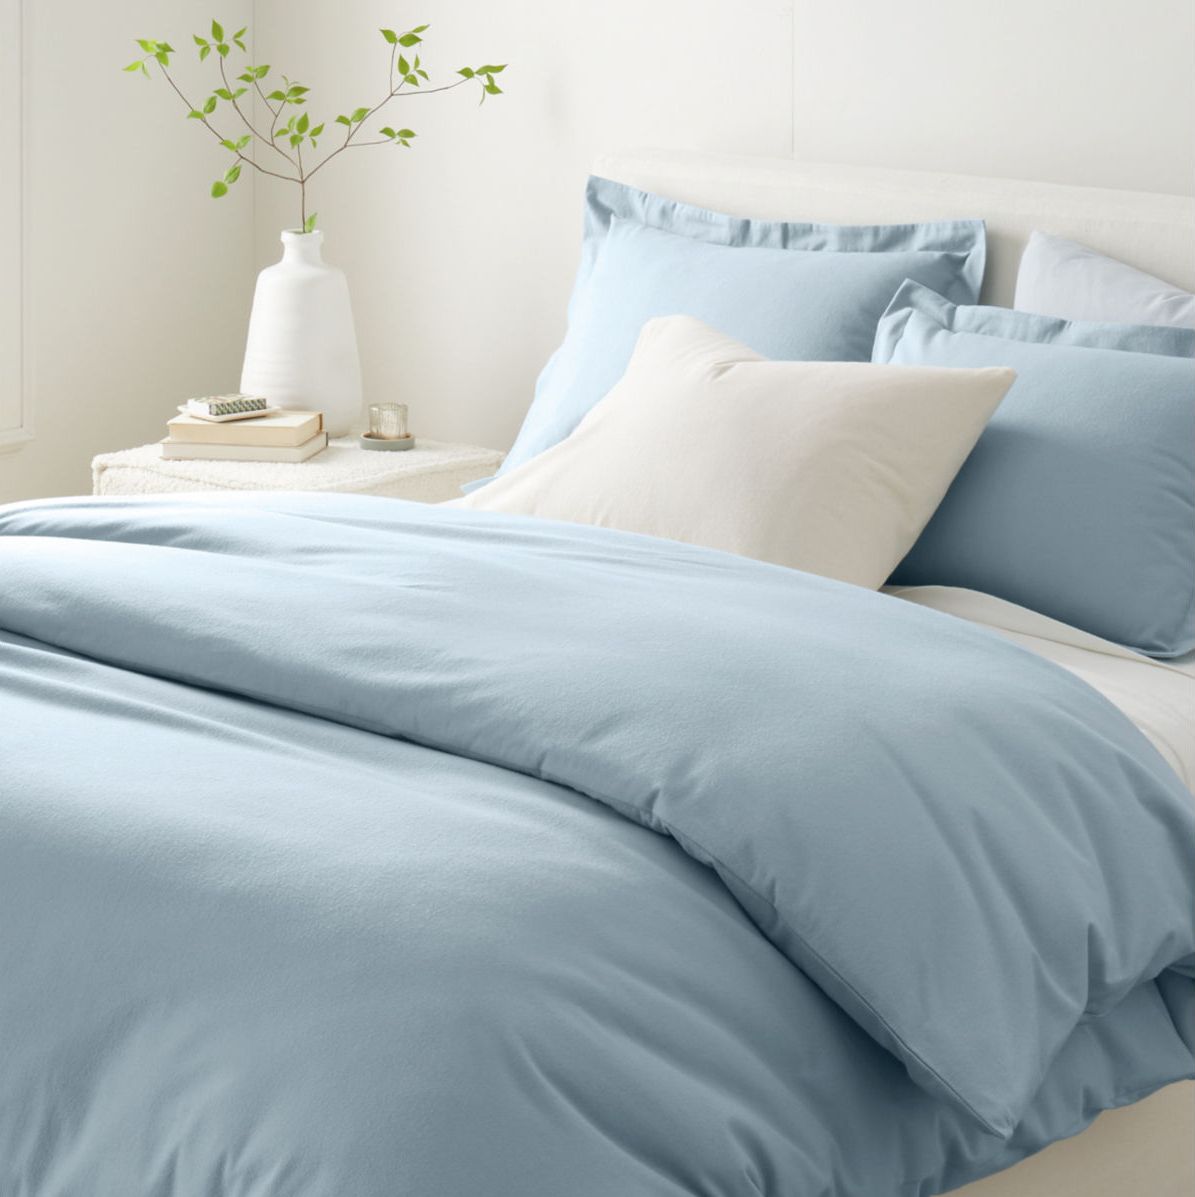 8 Flannel Sheet Sets to Keep You Cozy